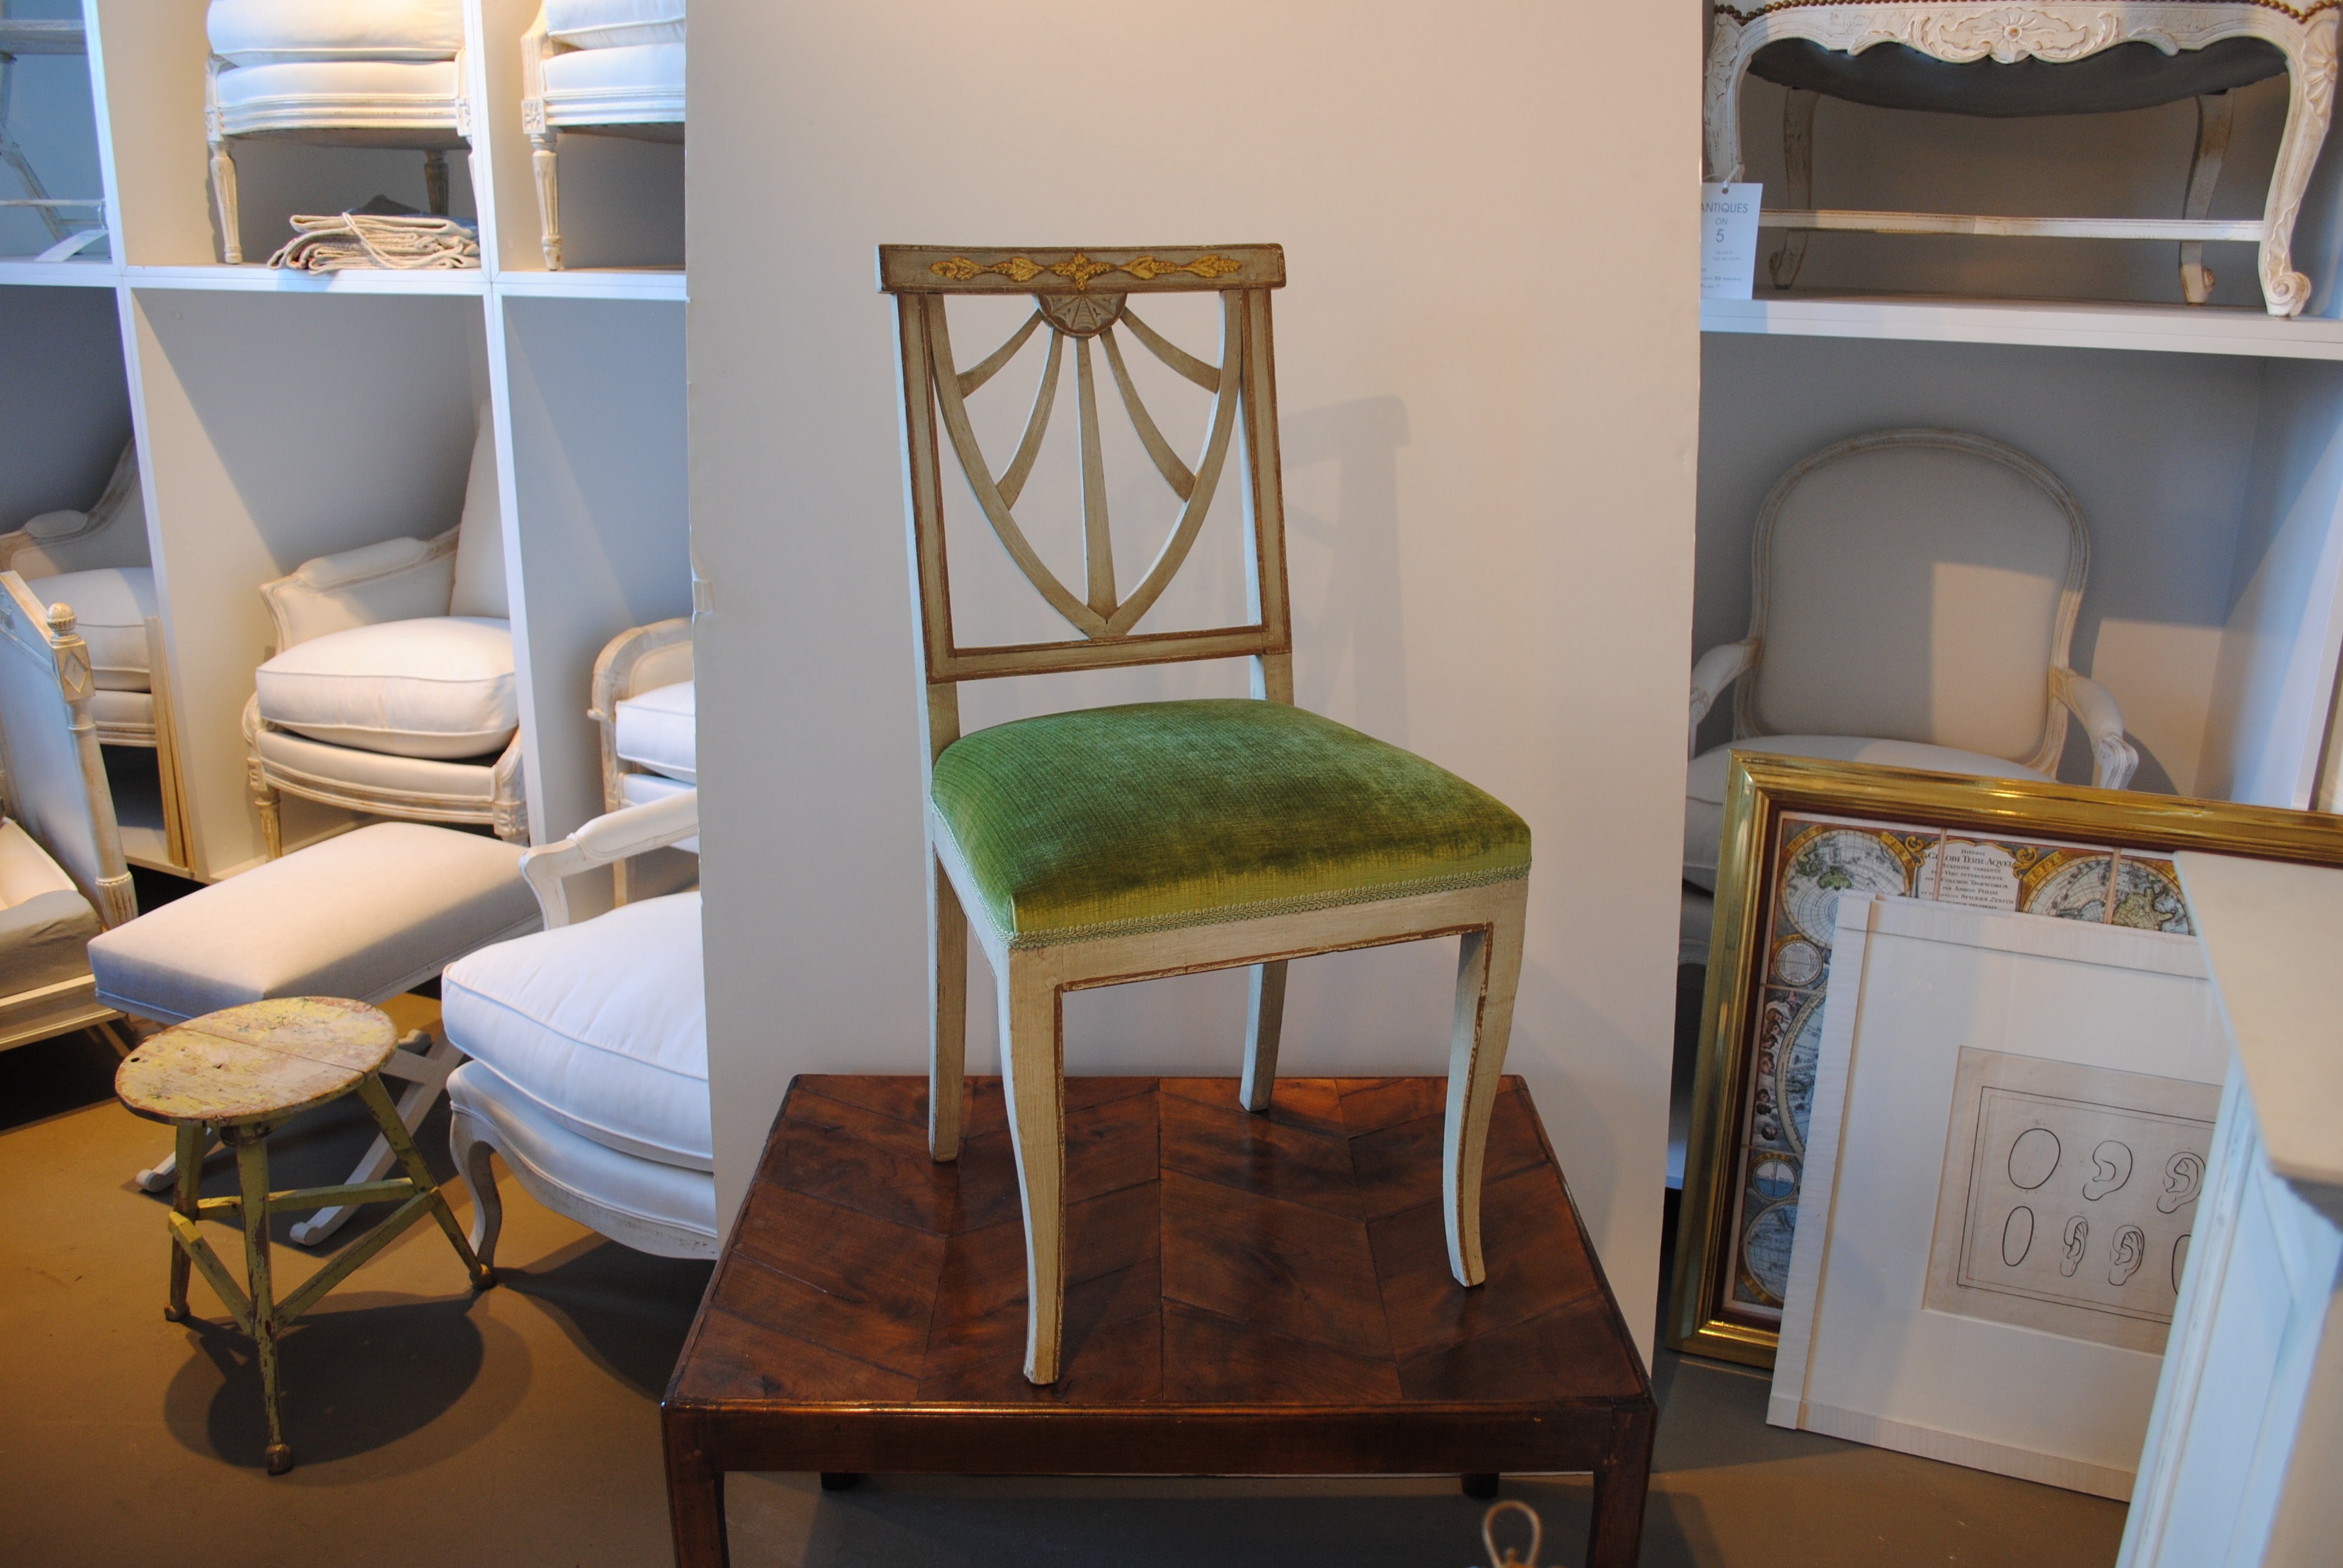 Painted & Gilt Side Chair